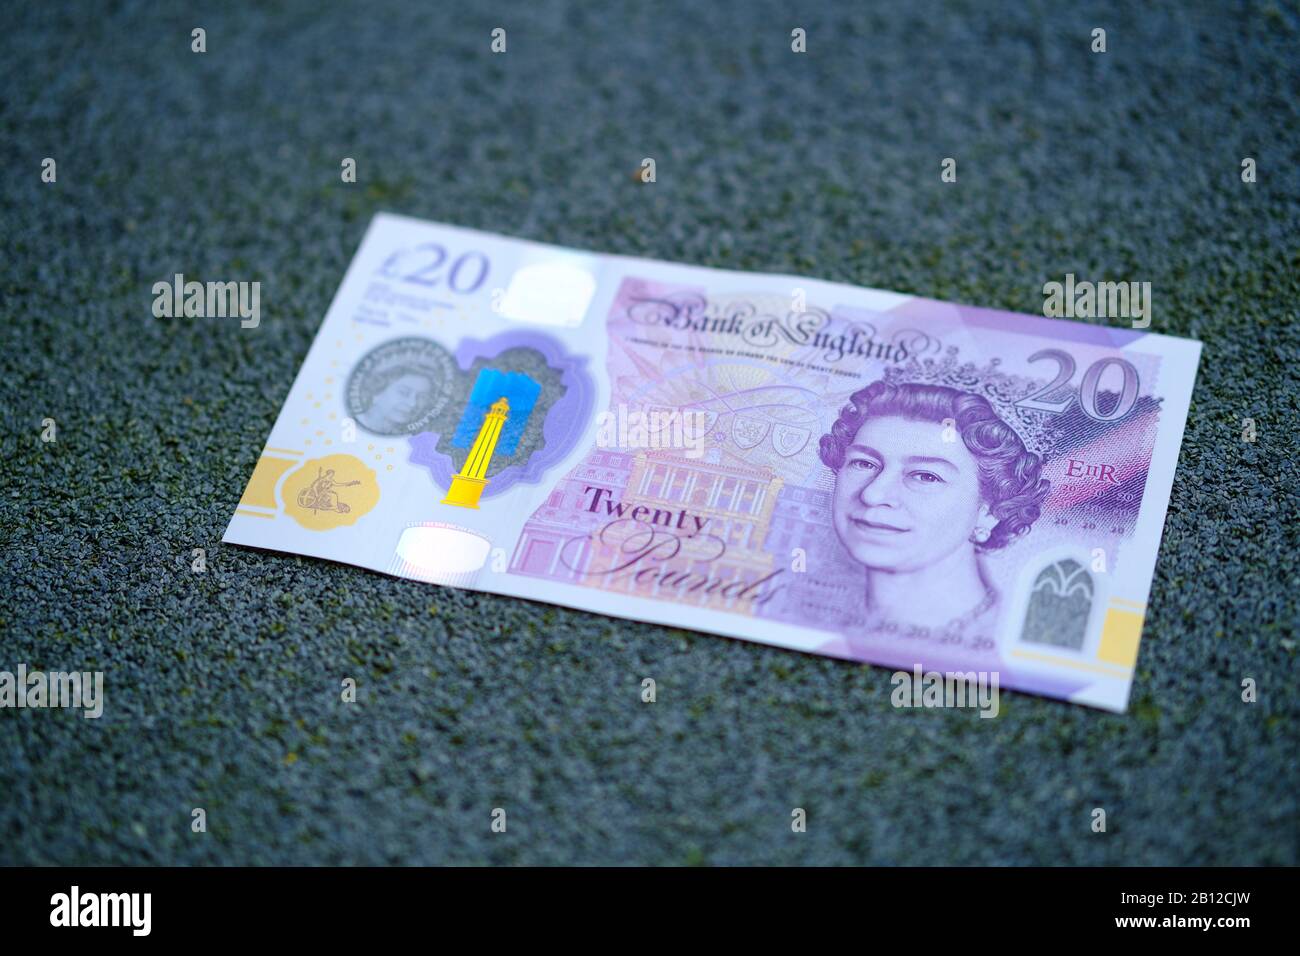 New British 20 pound polymer banknote released in February 2020 in the United Kingdom. Stock Photo